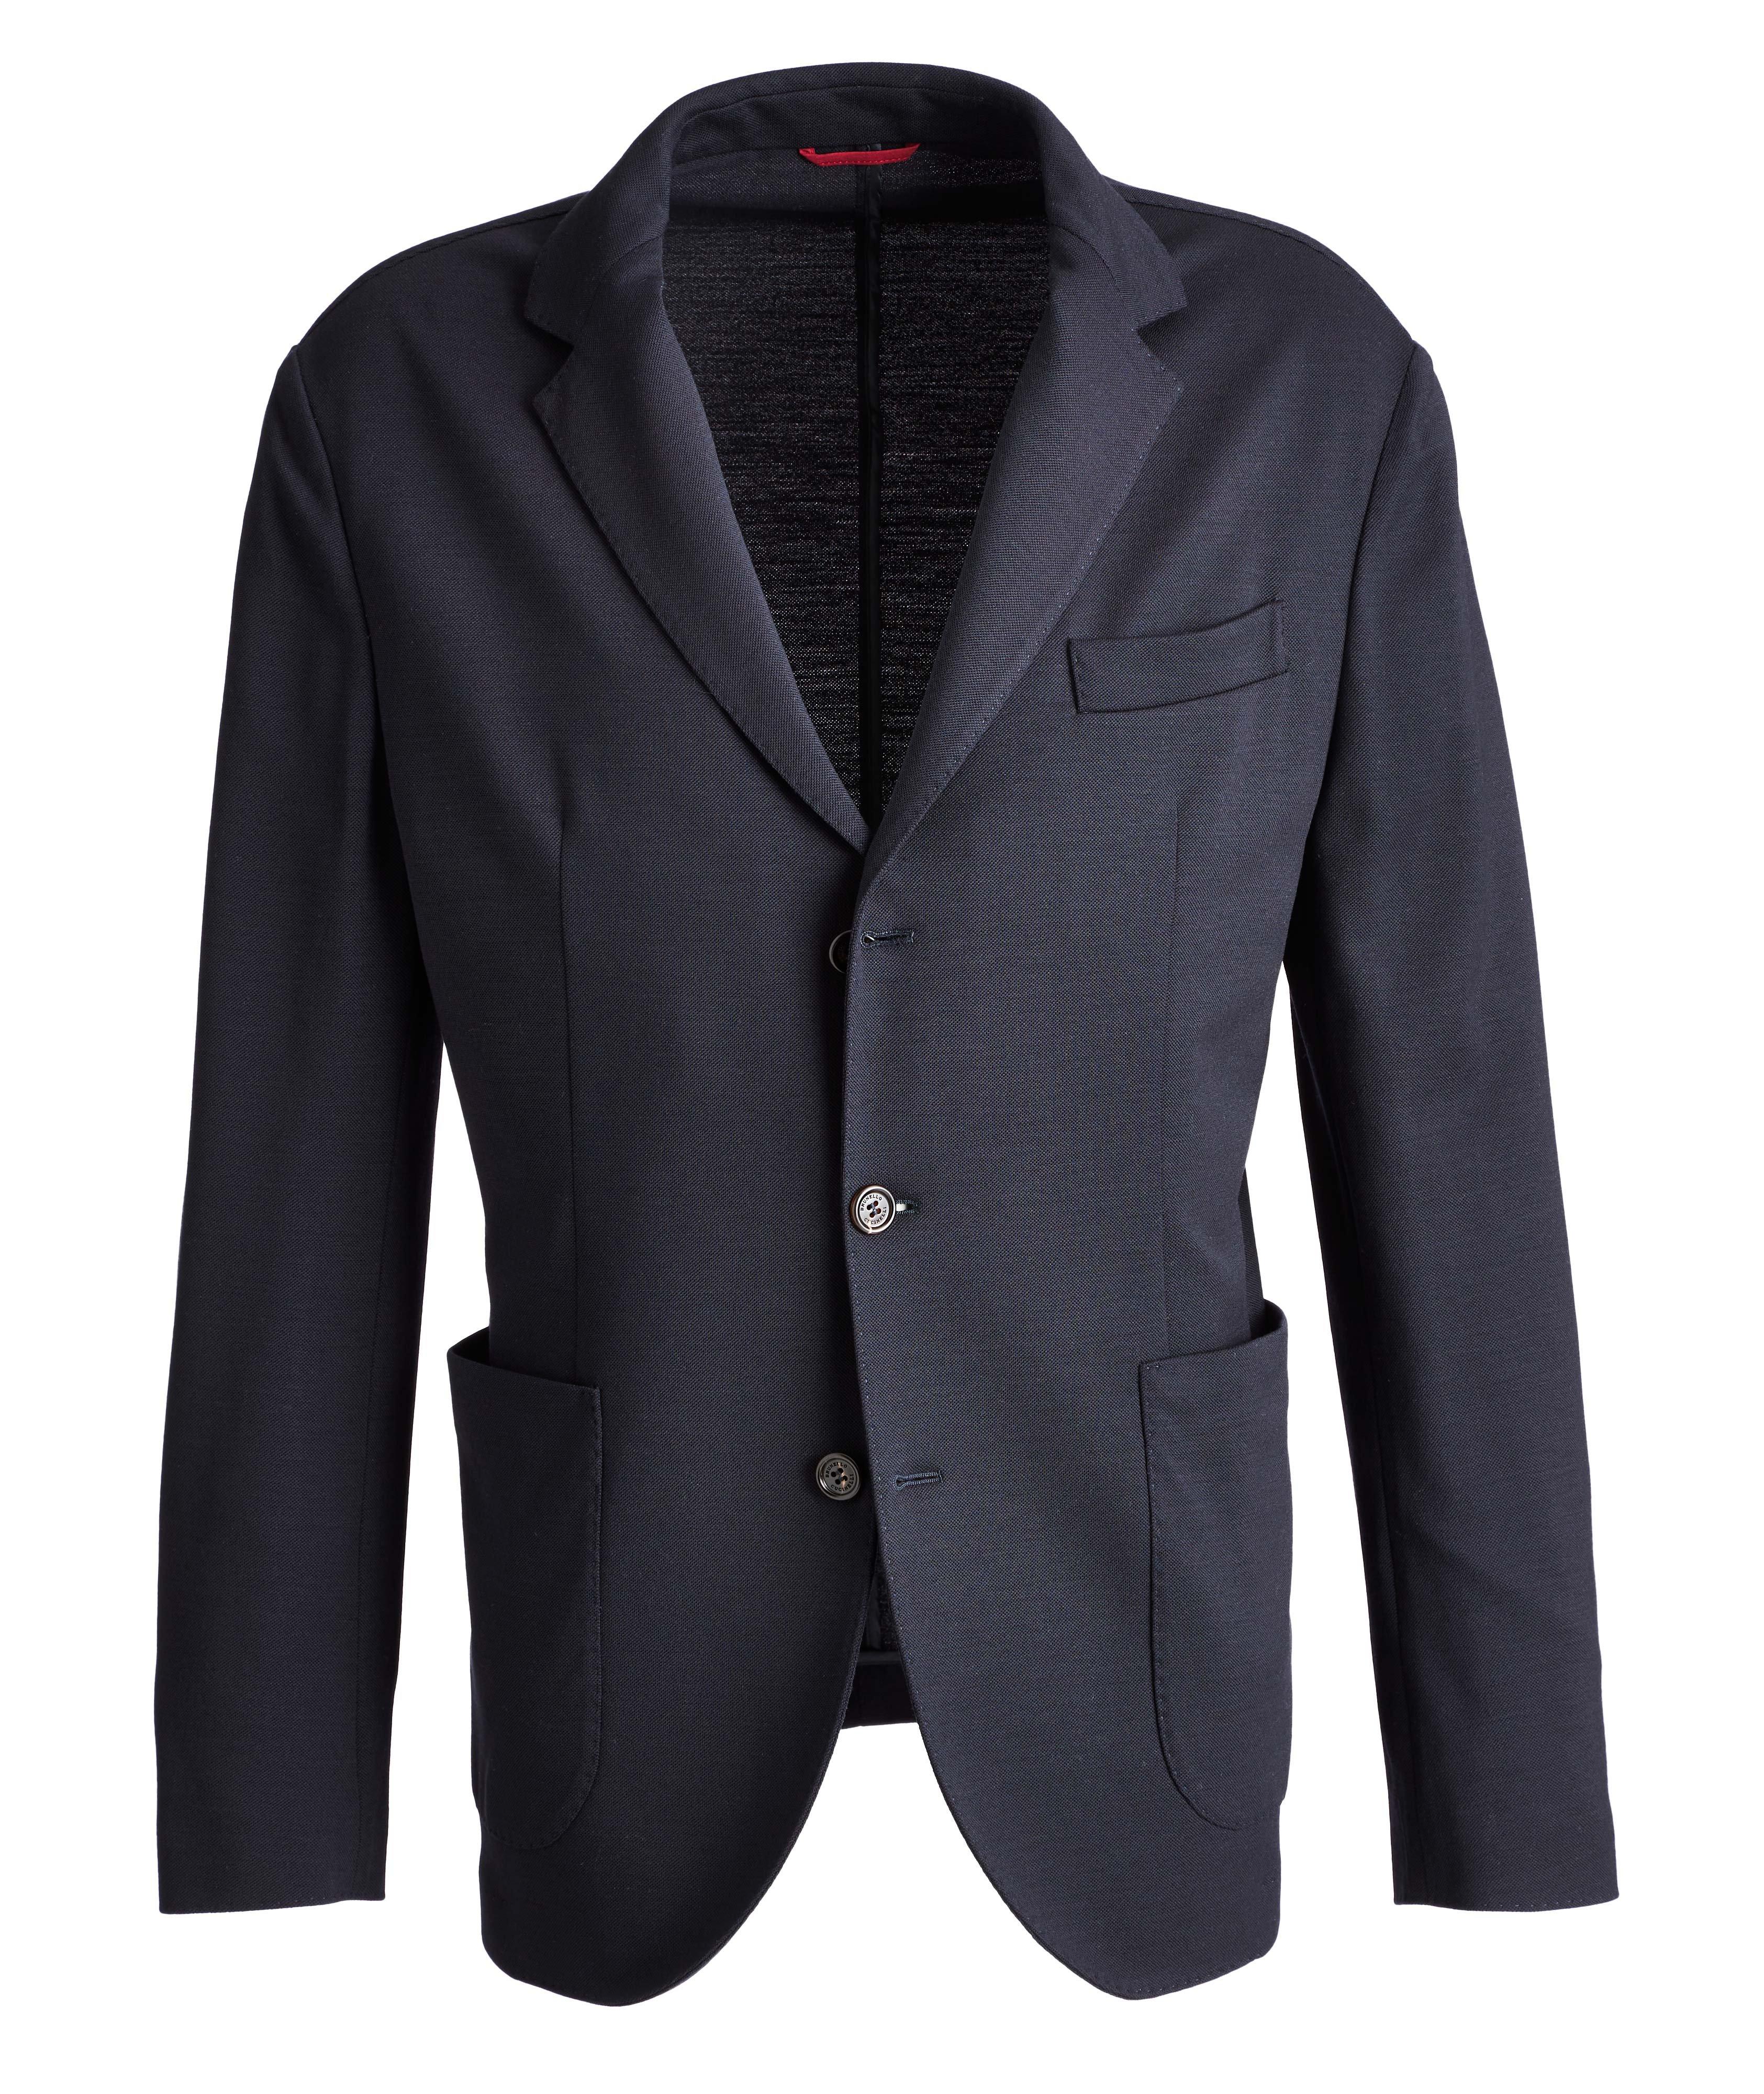 Unstructured Piqué Wool Sports Jacket image 0